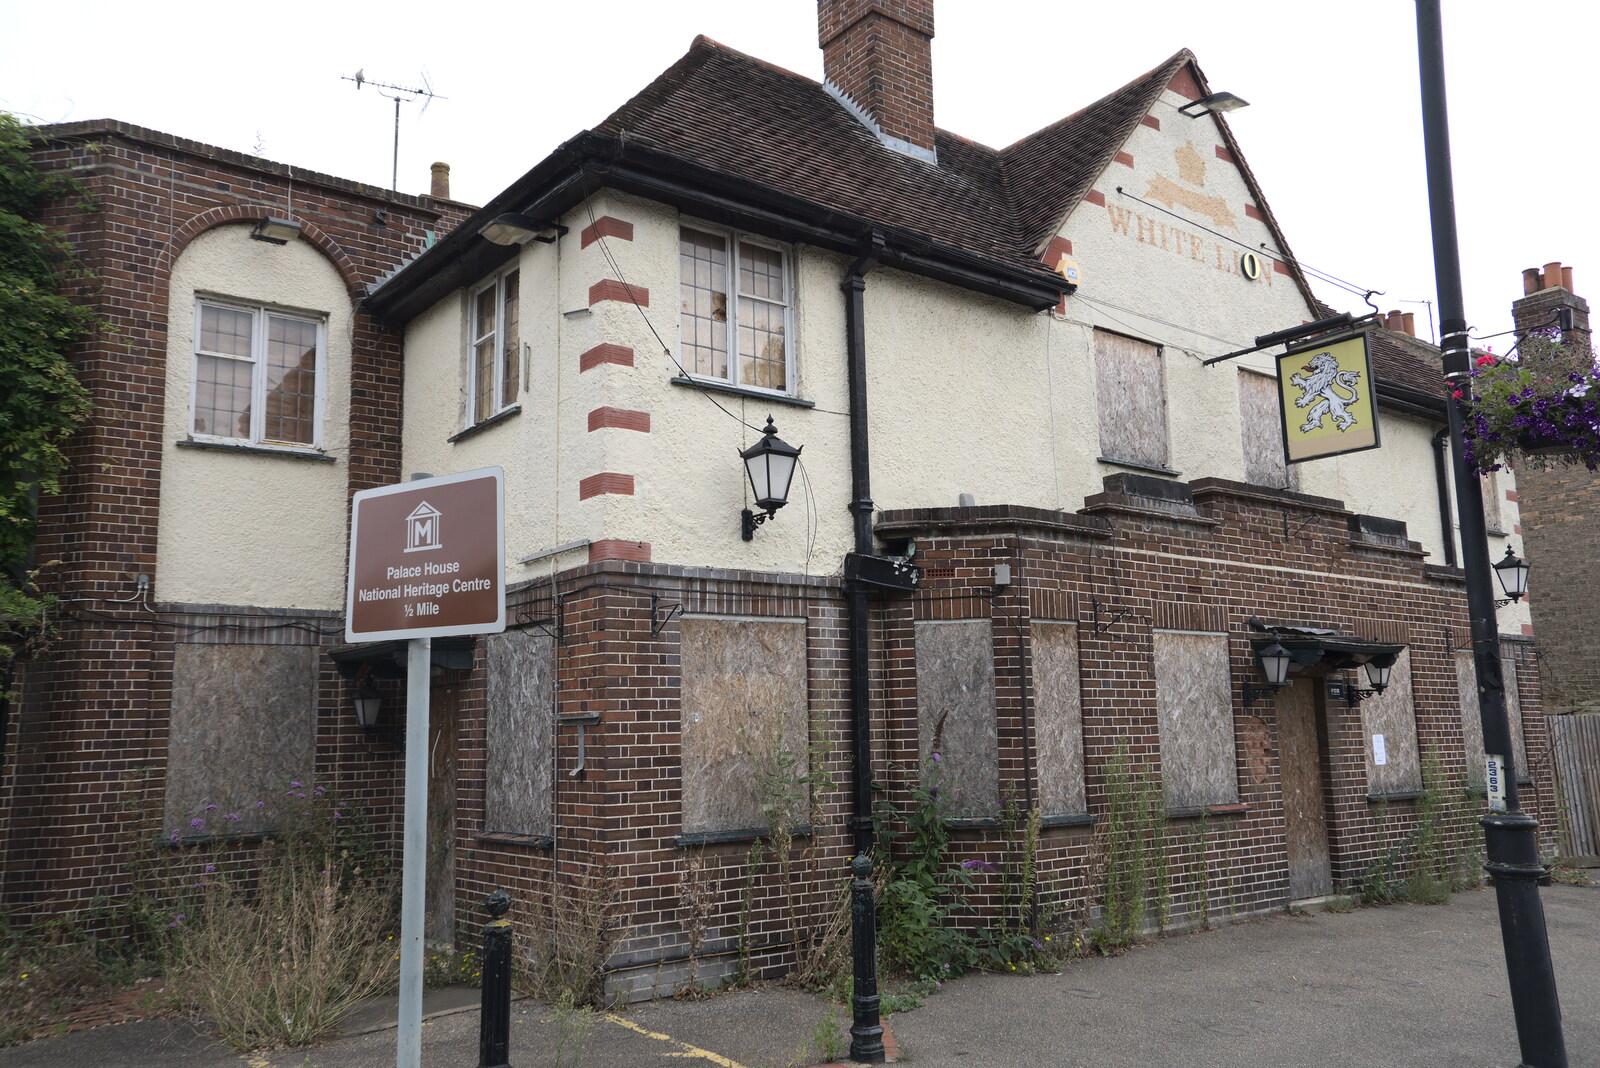 A derelict pub on the High Street, Newmarket from Petay's Wedding Reception, Fanhams Hall, Ware, Hertfordshire - 20th August 2021